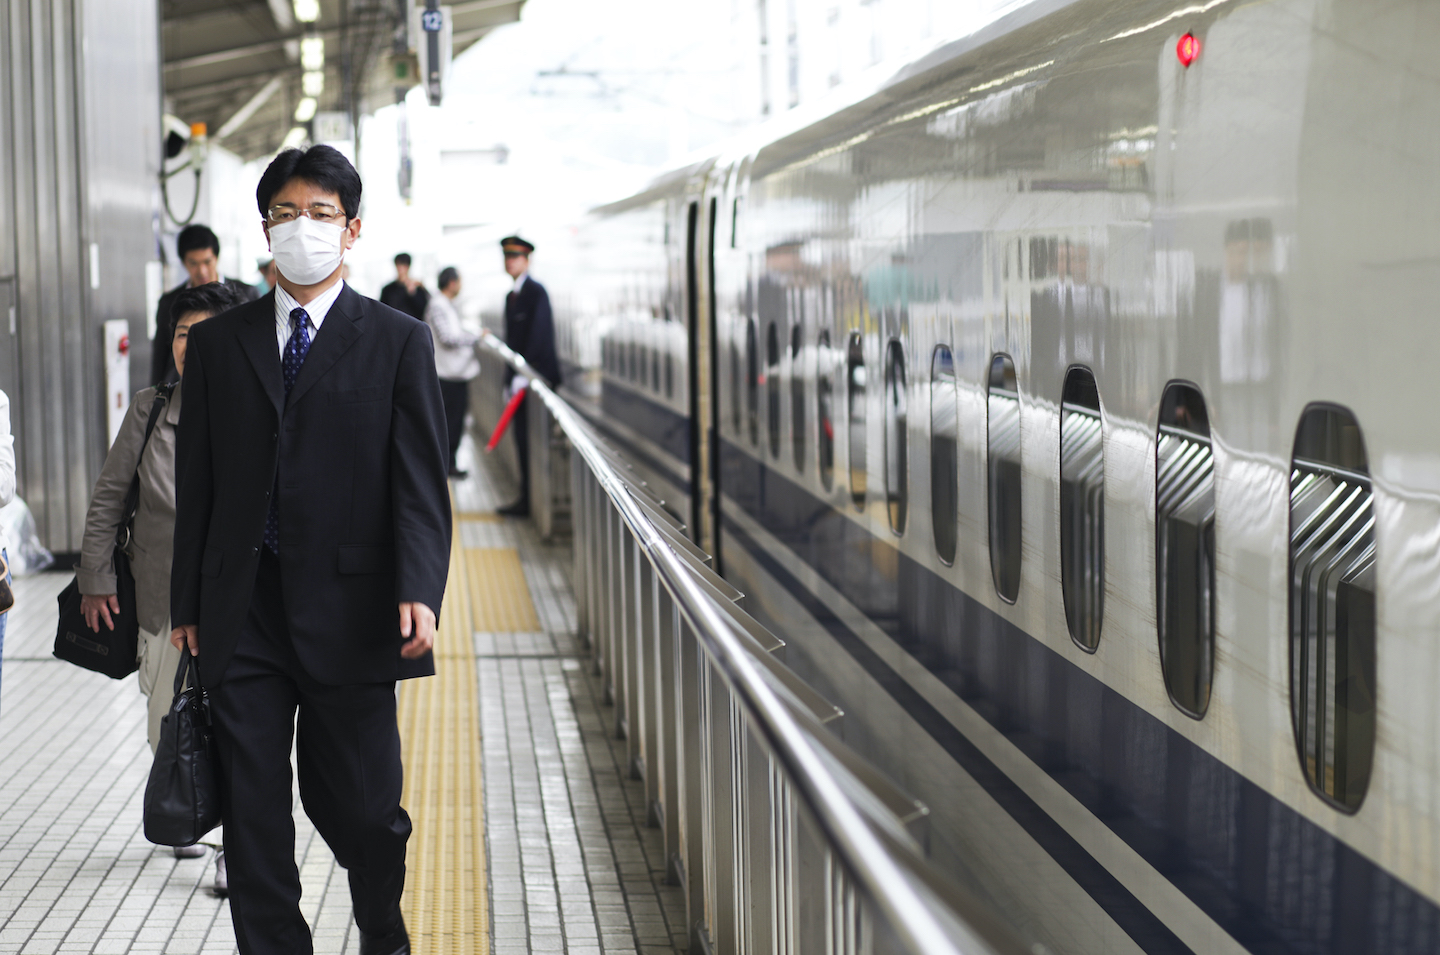 A man has just dis-embarked from a Japanese bullet train wearing a mask.